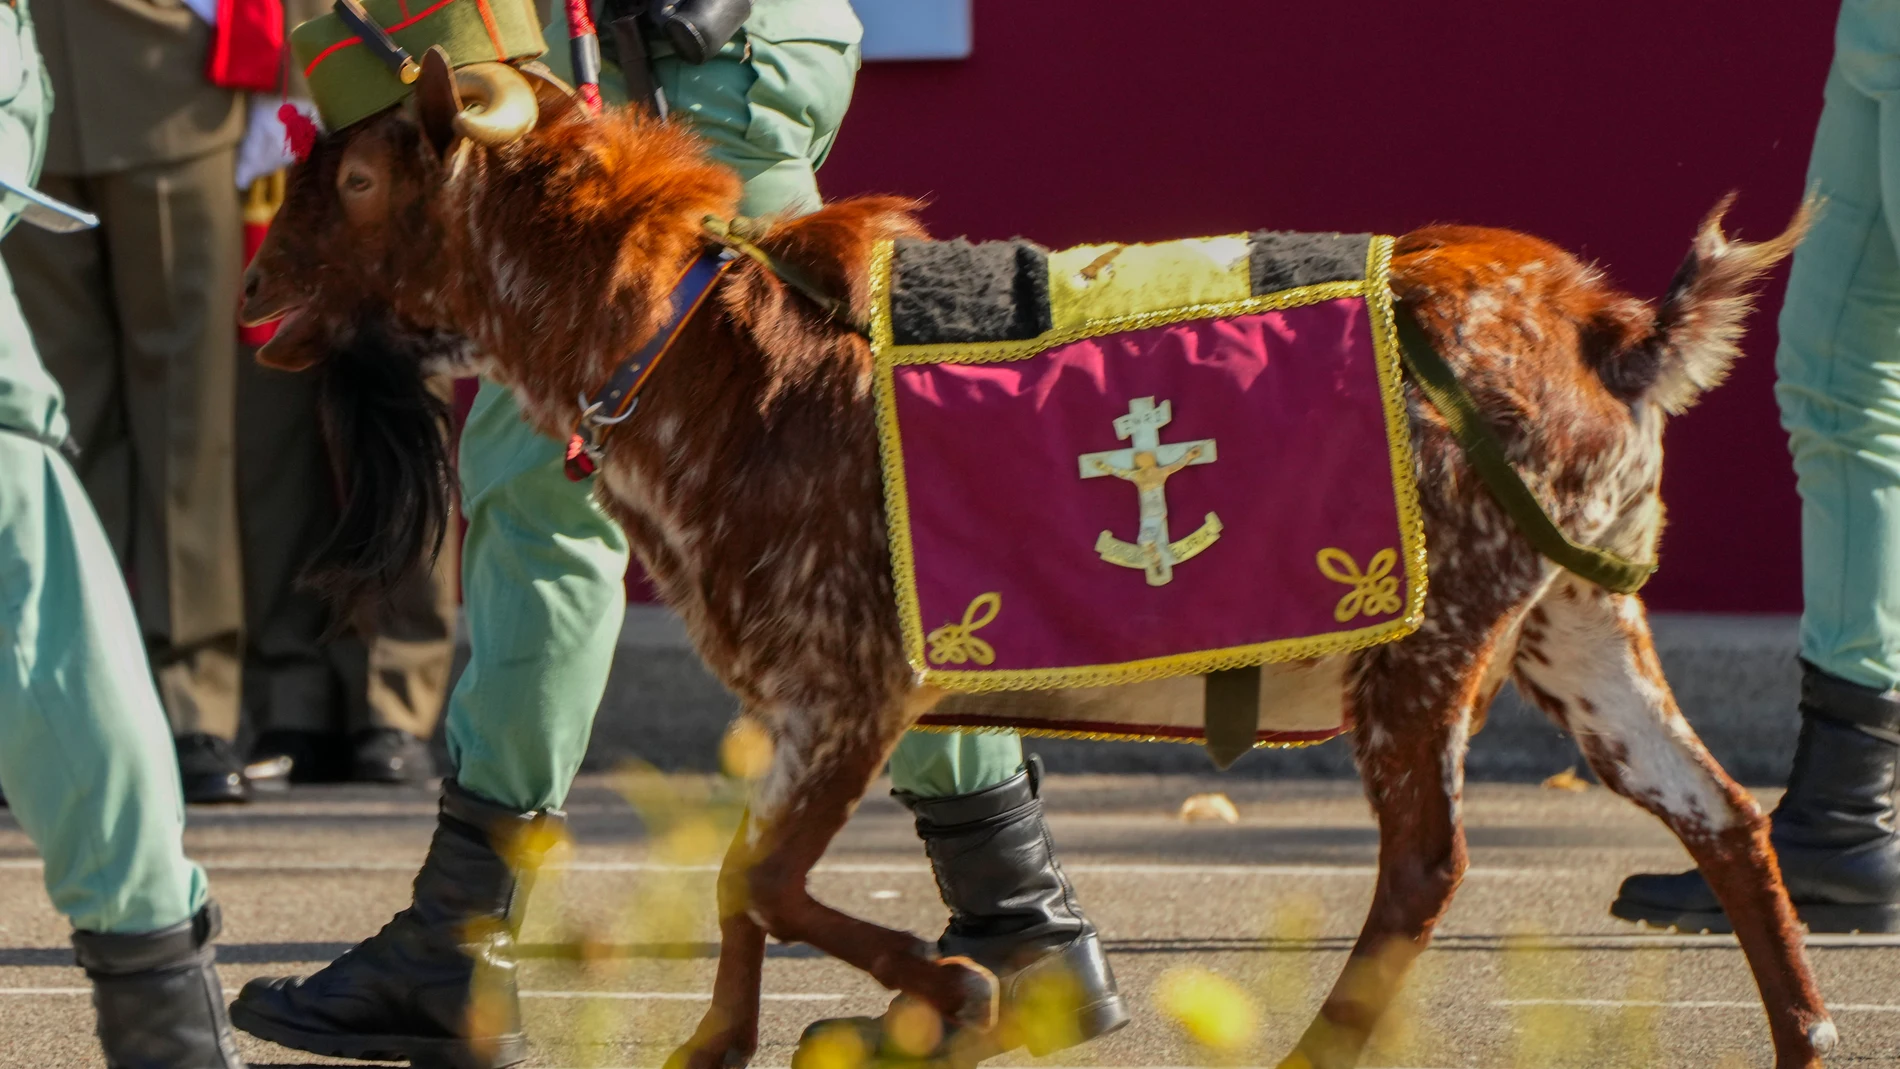 A goat, the pet of La Legion, an elite unit of the Spanish Army, walks during a military parade on the national holiday known as "Dia de la Hispanidad" or Hispanic Day in Madrid, Spain, Thursday, Oct. 12, 2023. Spain commemorates Christopher Columbus' arrival in the New World and also Spain's Armed Forces Day. (AP Photo/Manu Fernandez)